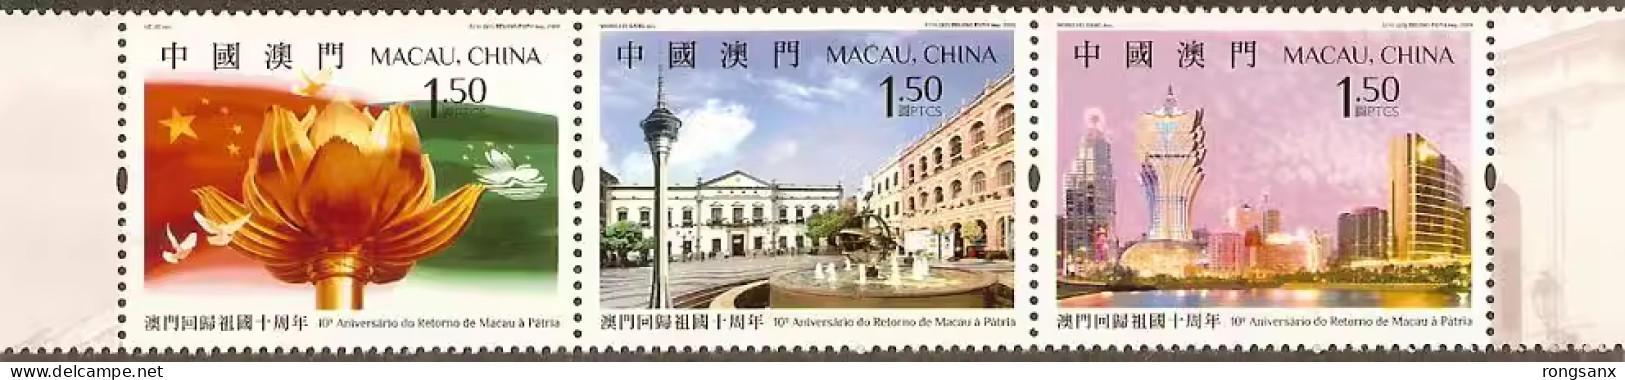 2009 MACAO 10 ANNI OF MACAO'S RETURN TO MOTHERLAND 3V STAMP - Unused Stamps